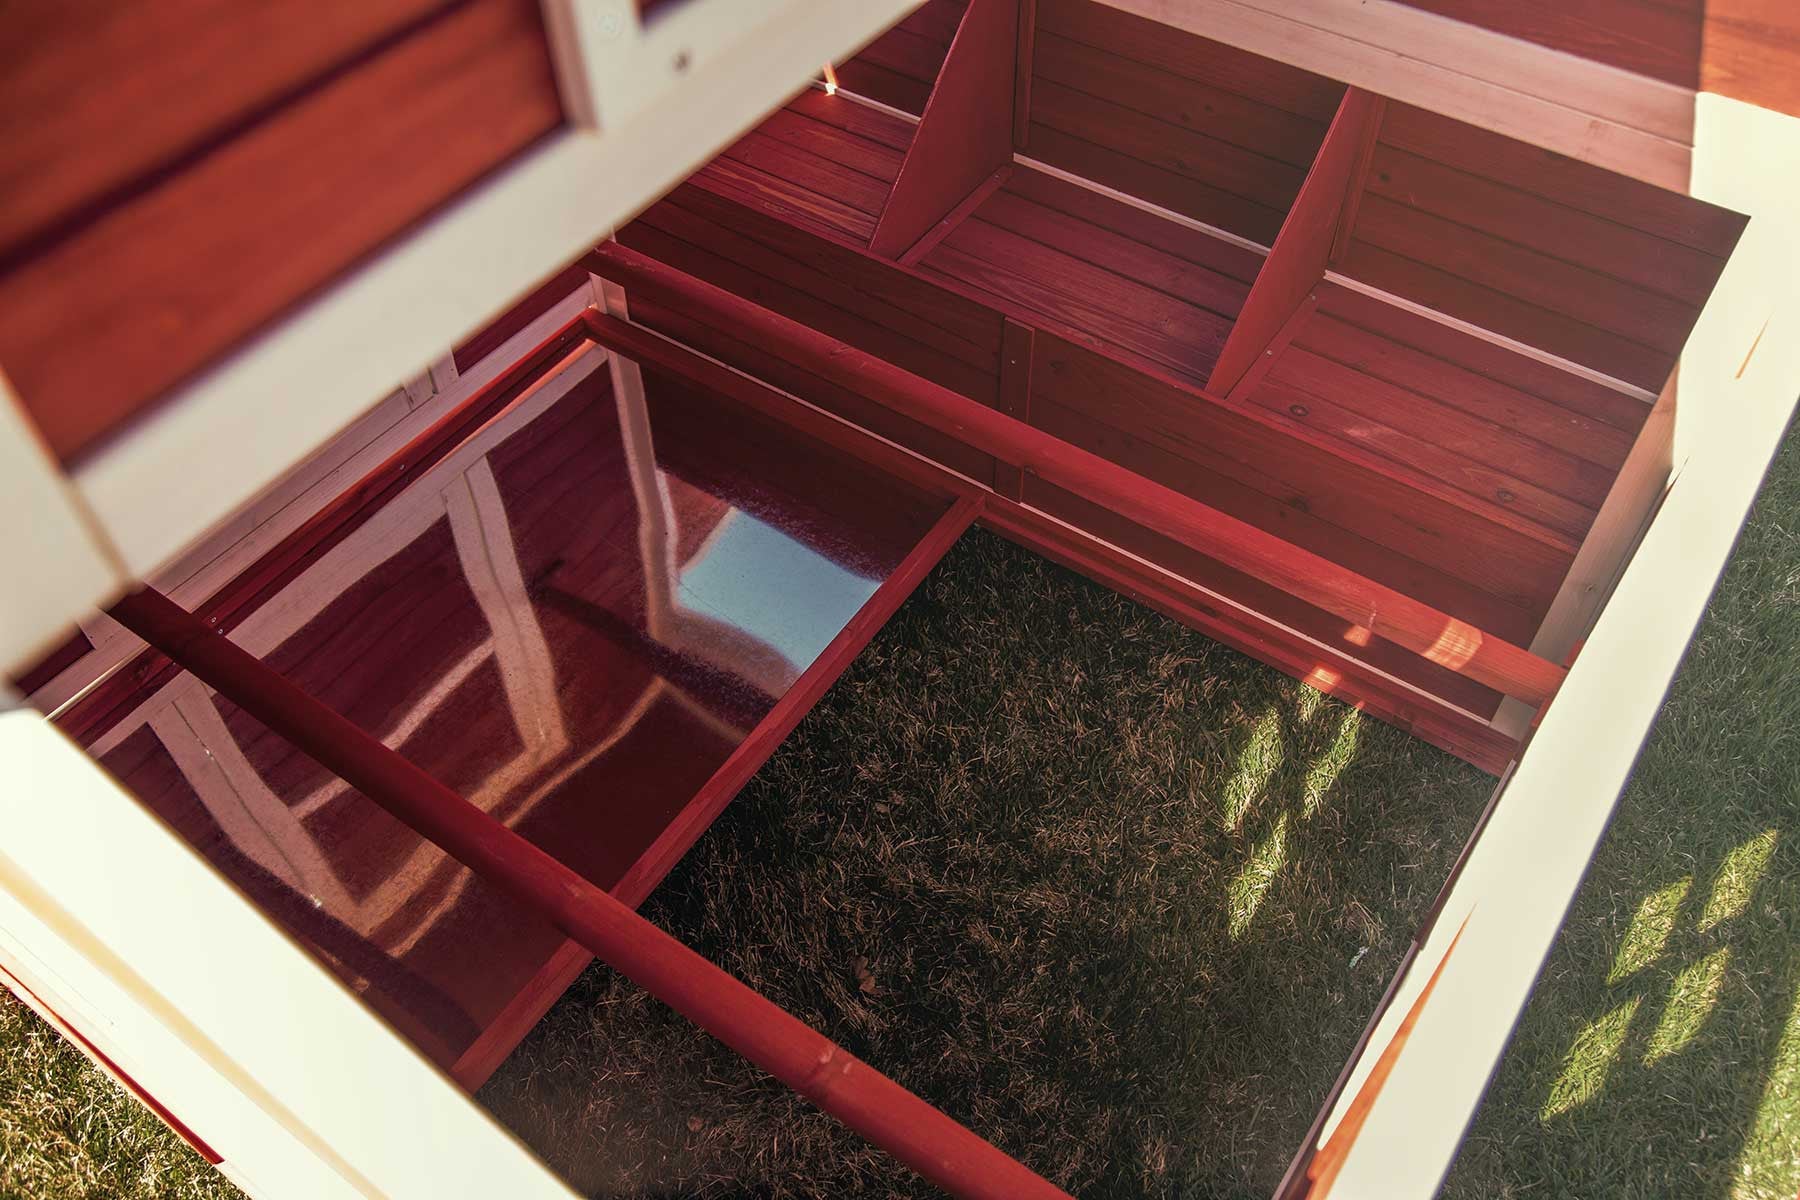 An interior view of the Schoolhouse chicken coop, showing roosting bars, sliding mess pans, and three nesting areas